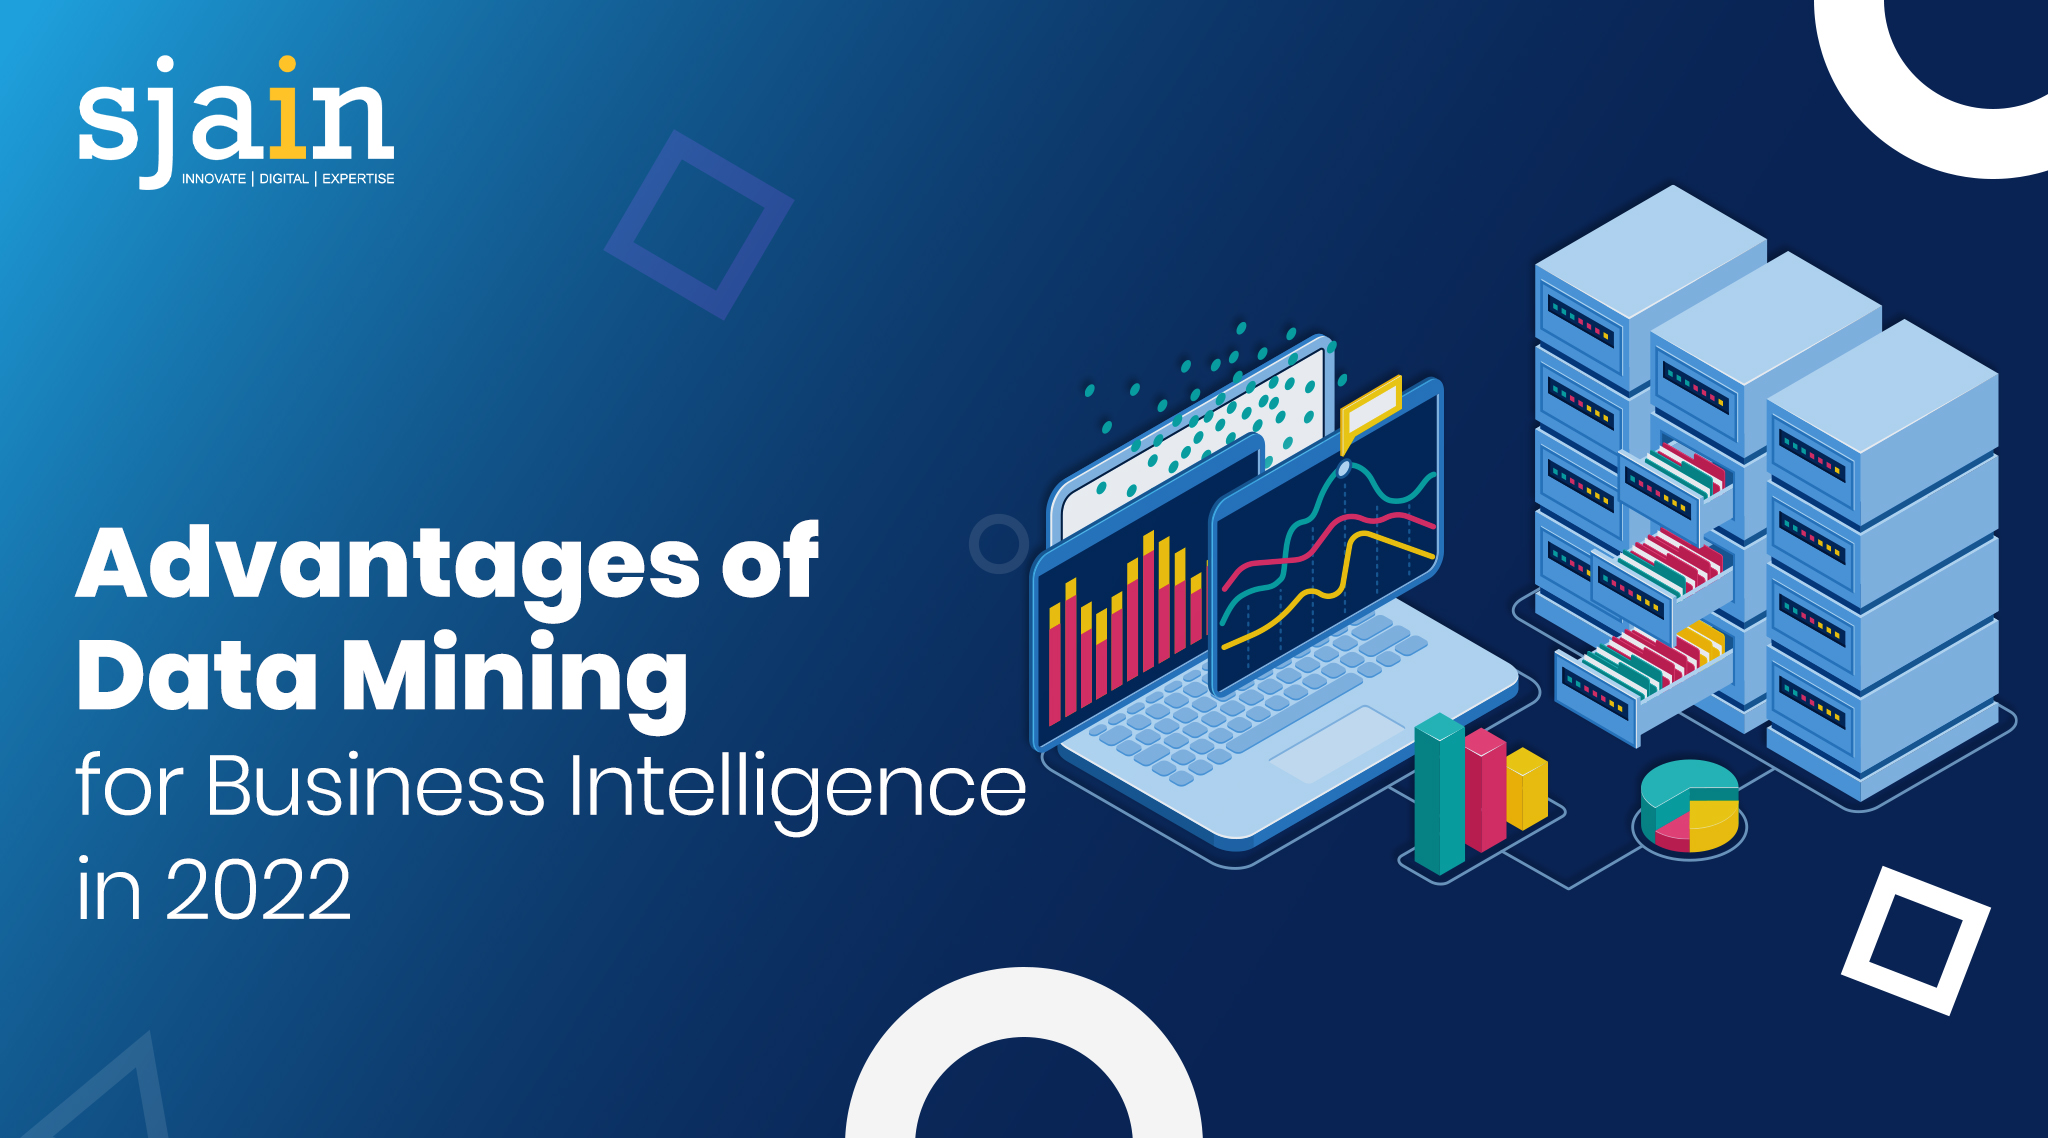 8 Advantages of Data Mining for Business Intelligence in 2022